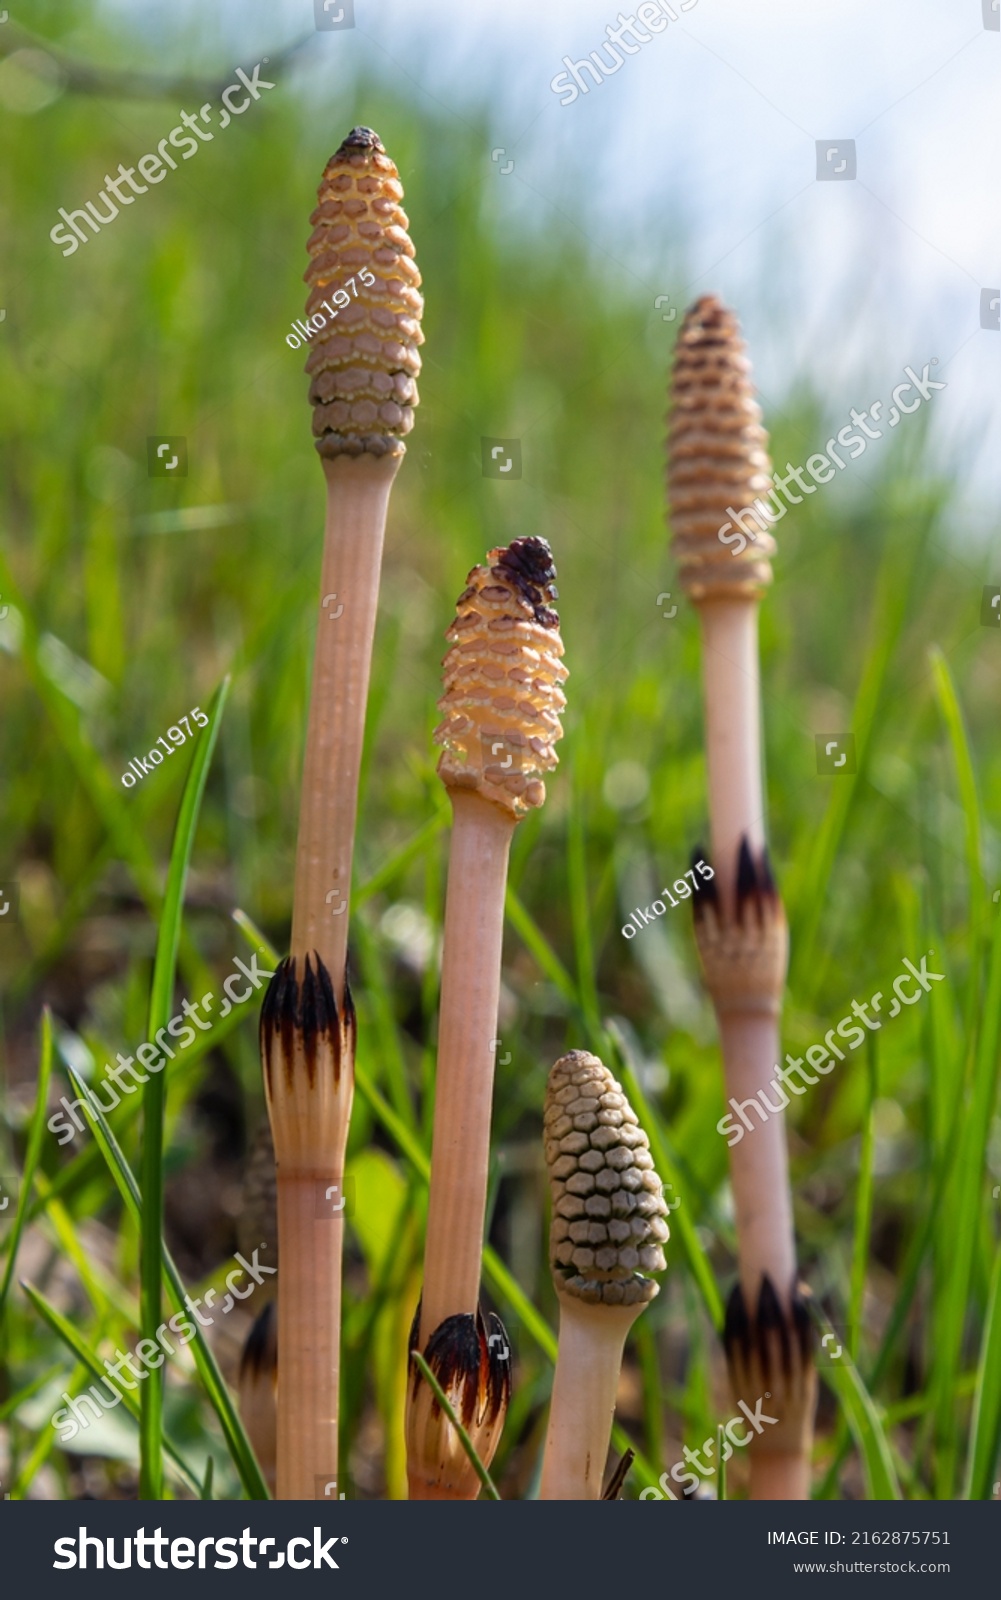 Equisetum arvense, the field horsetail or common horsetail, is an herbaceous perennial plant of the family Equisetaceae. Horsetail plant Equisetum arvense. #2162875751